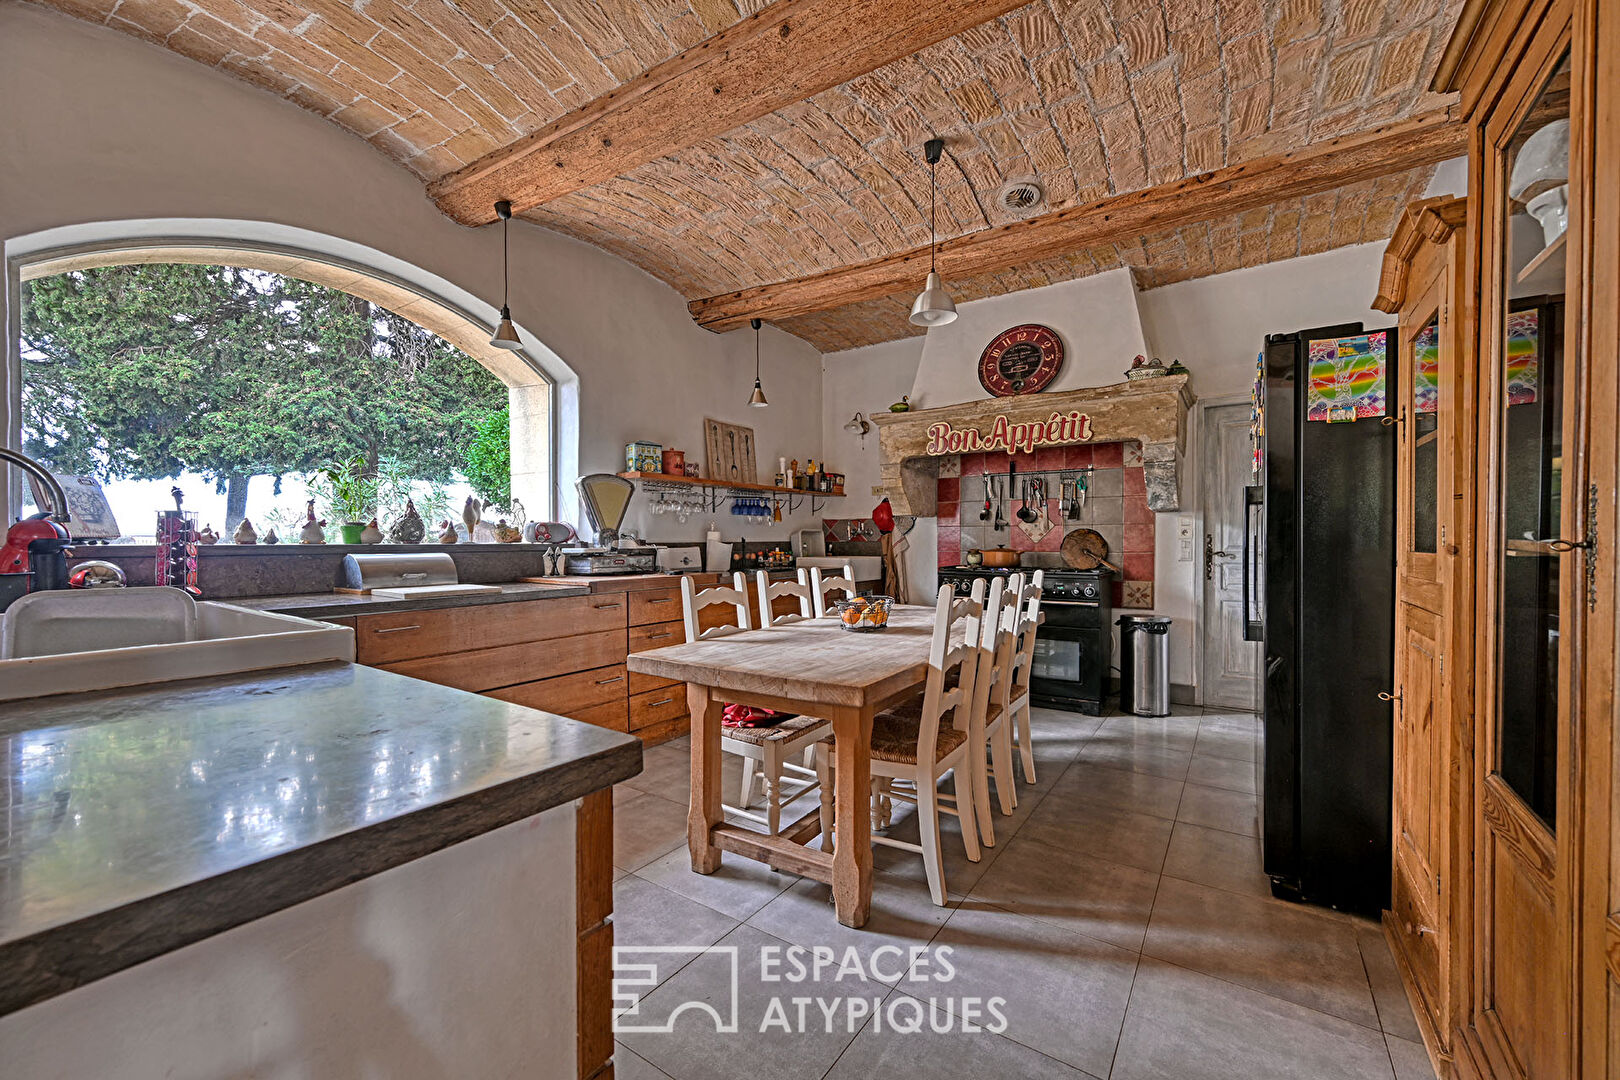 Exceptional estate with bastide, outbuildings and century-old park